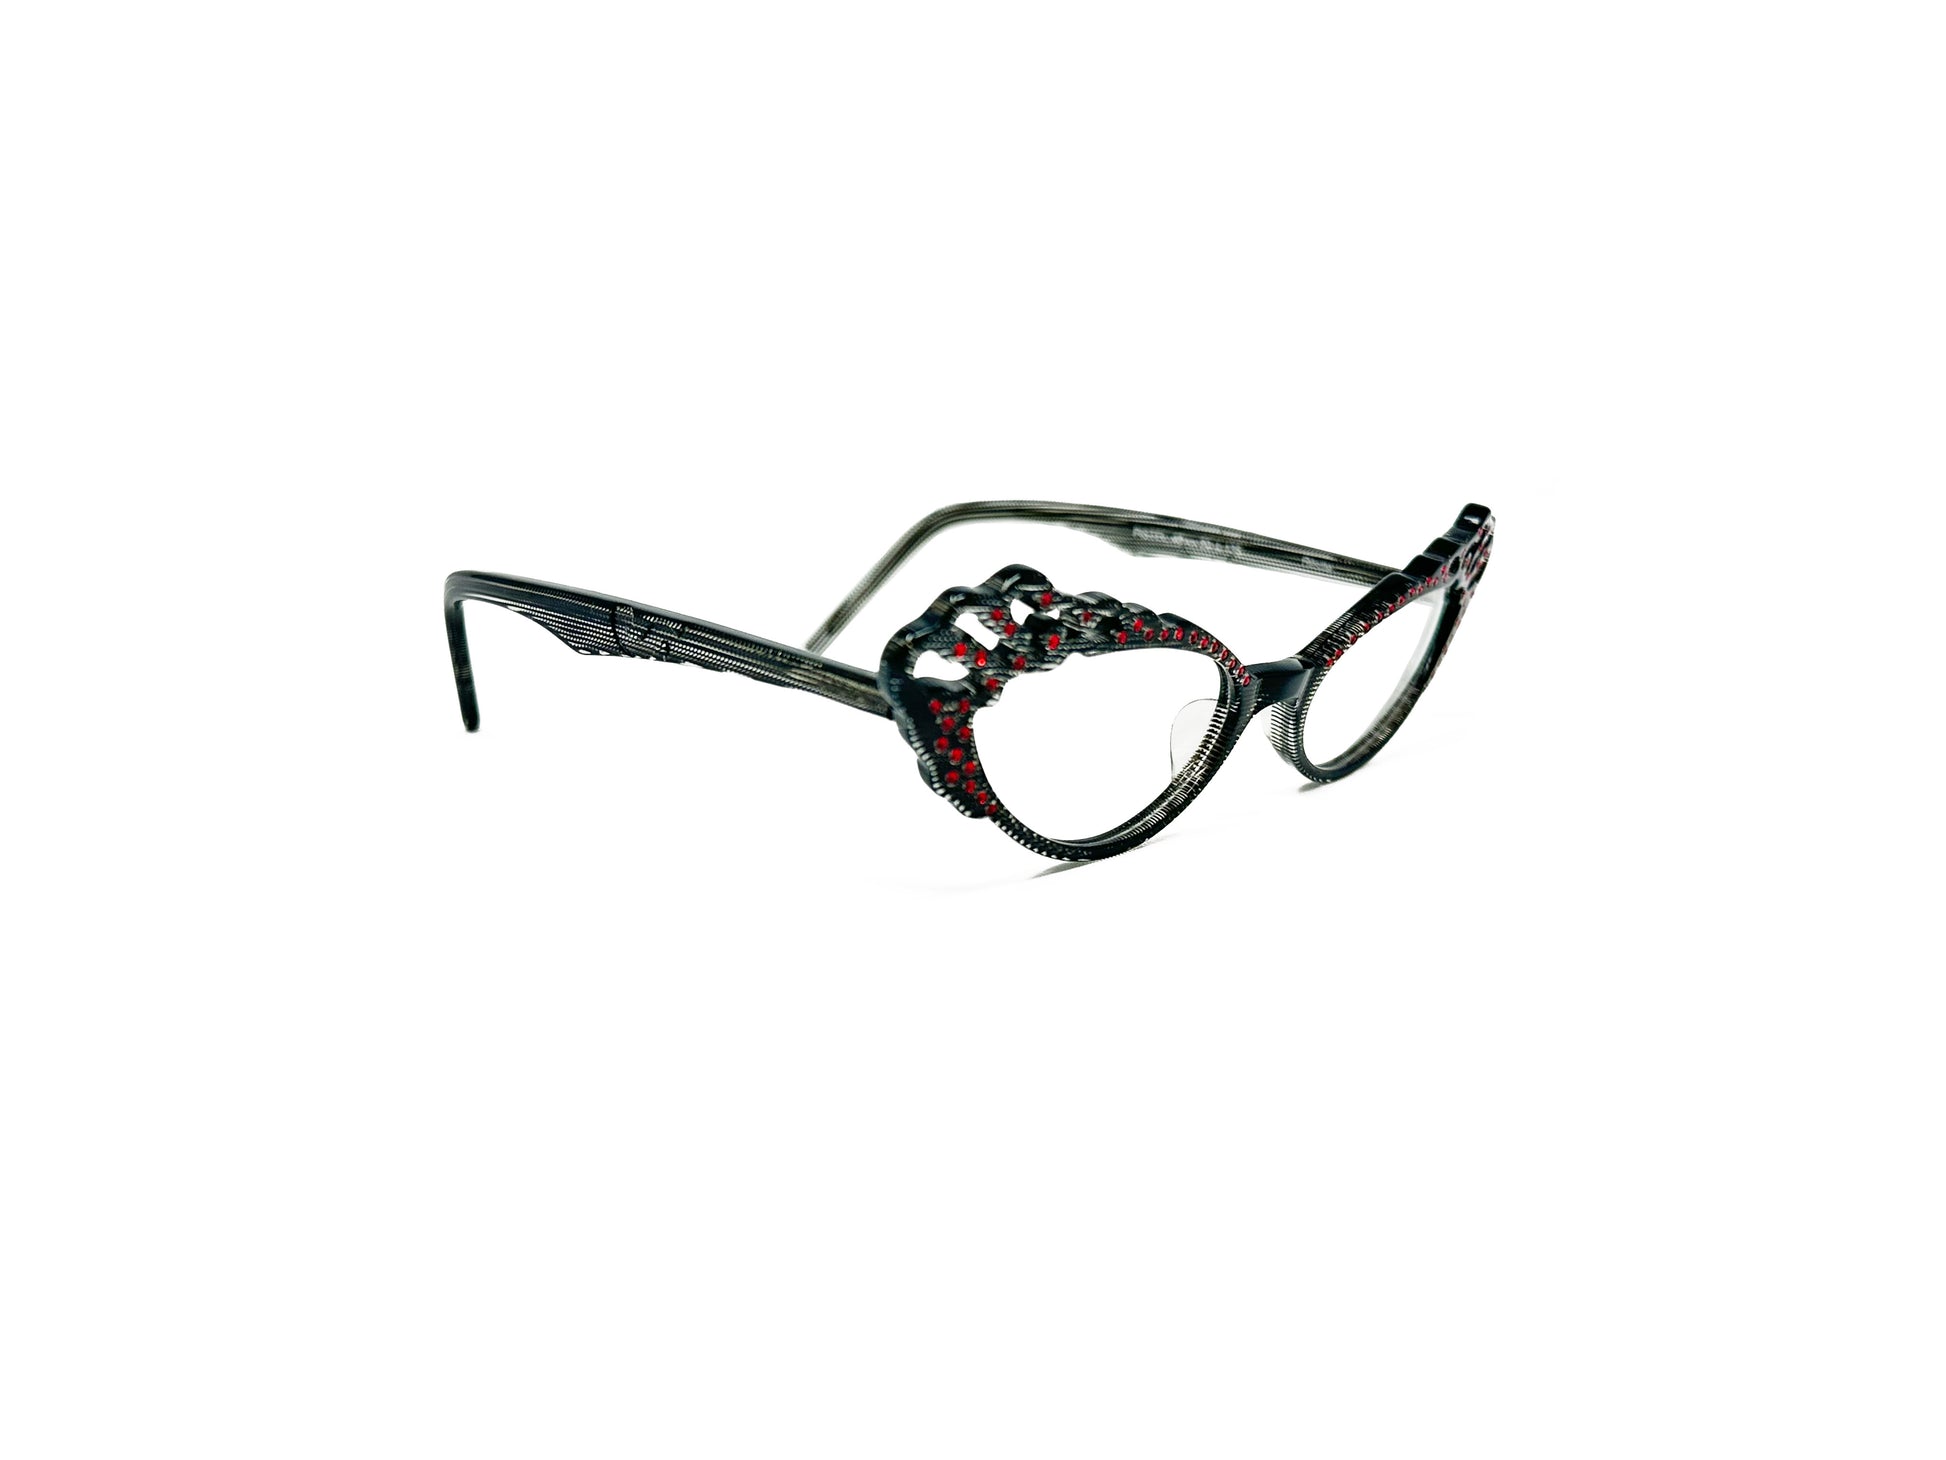 Traction acetate cateye optical frame with a wavy top and oval cut-outs. Model: Pistel. Color: Resille - Transparent with black and red dots. Side view.